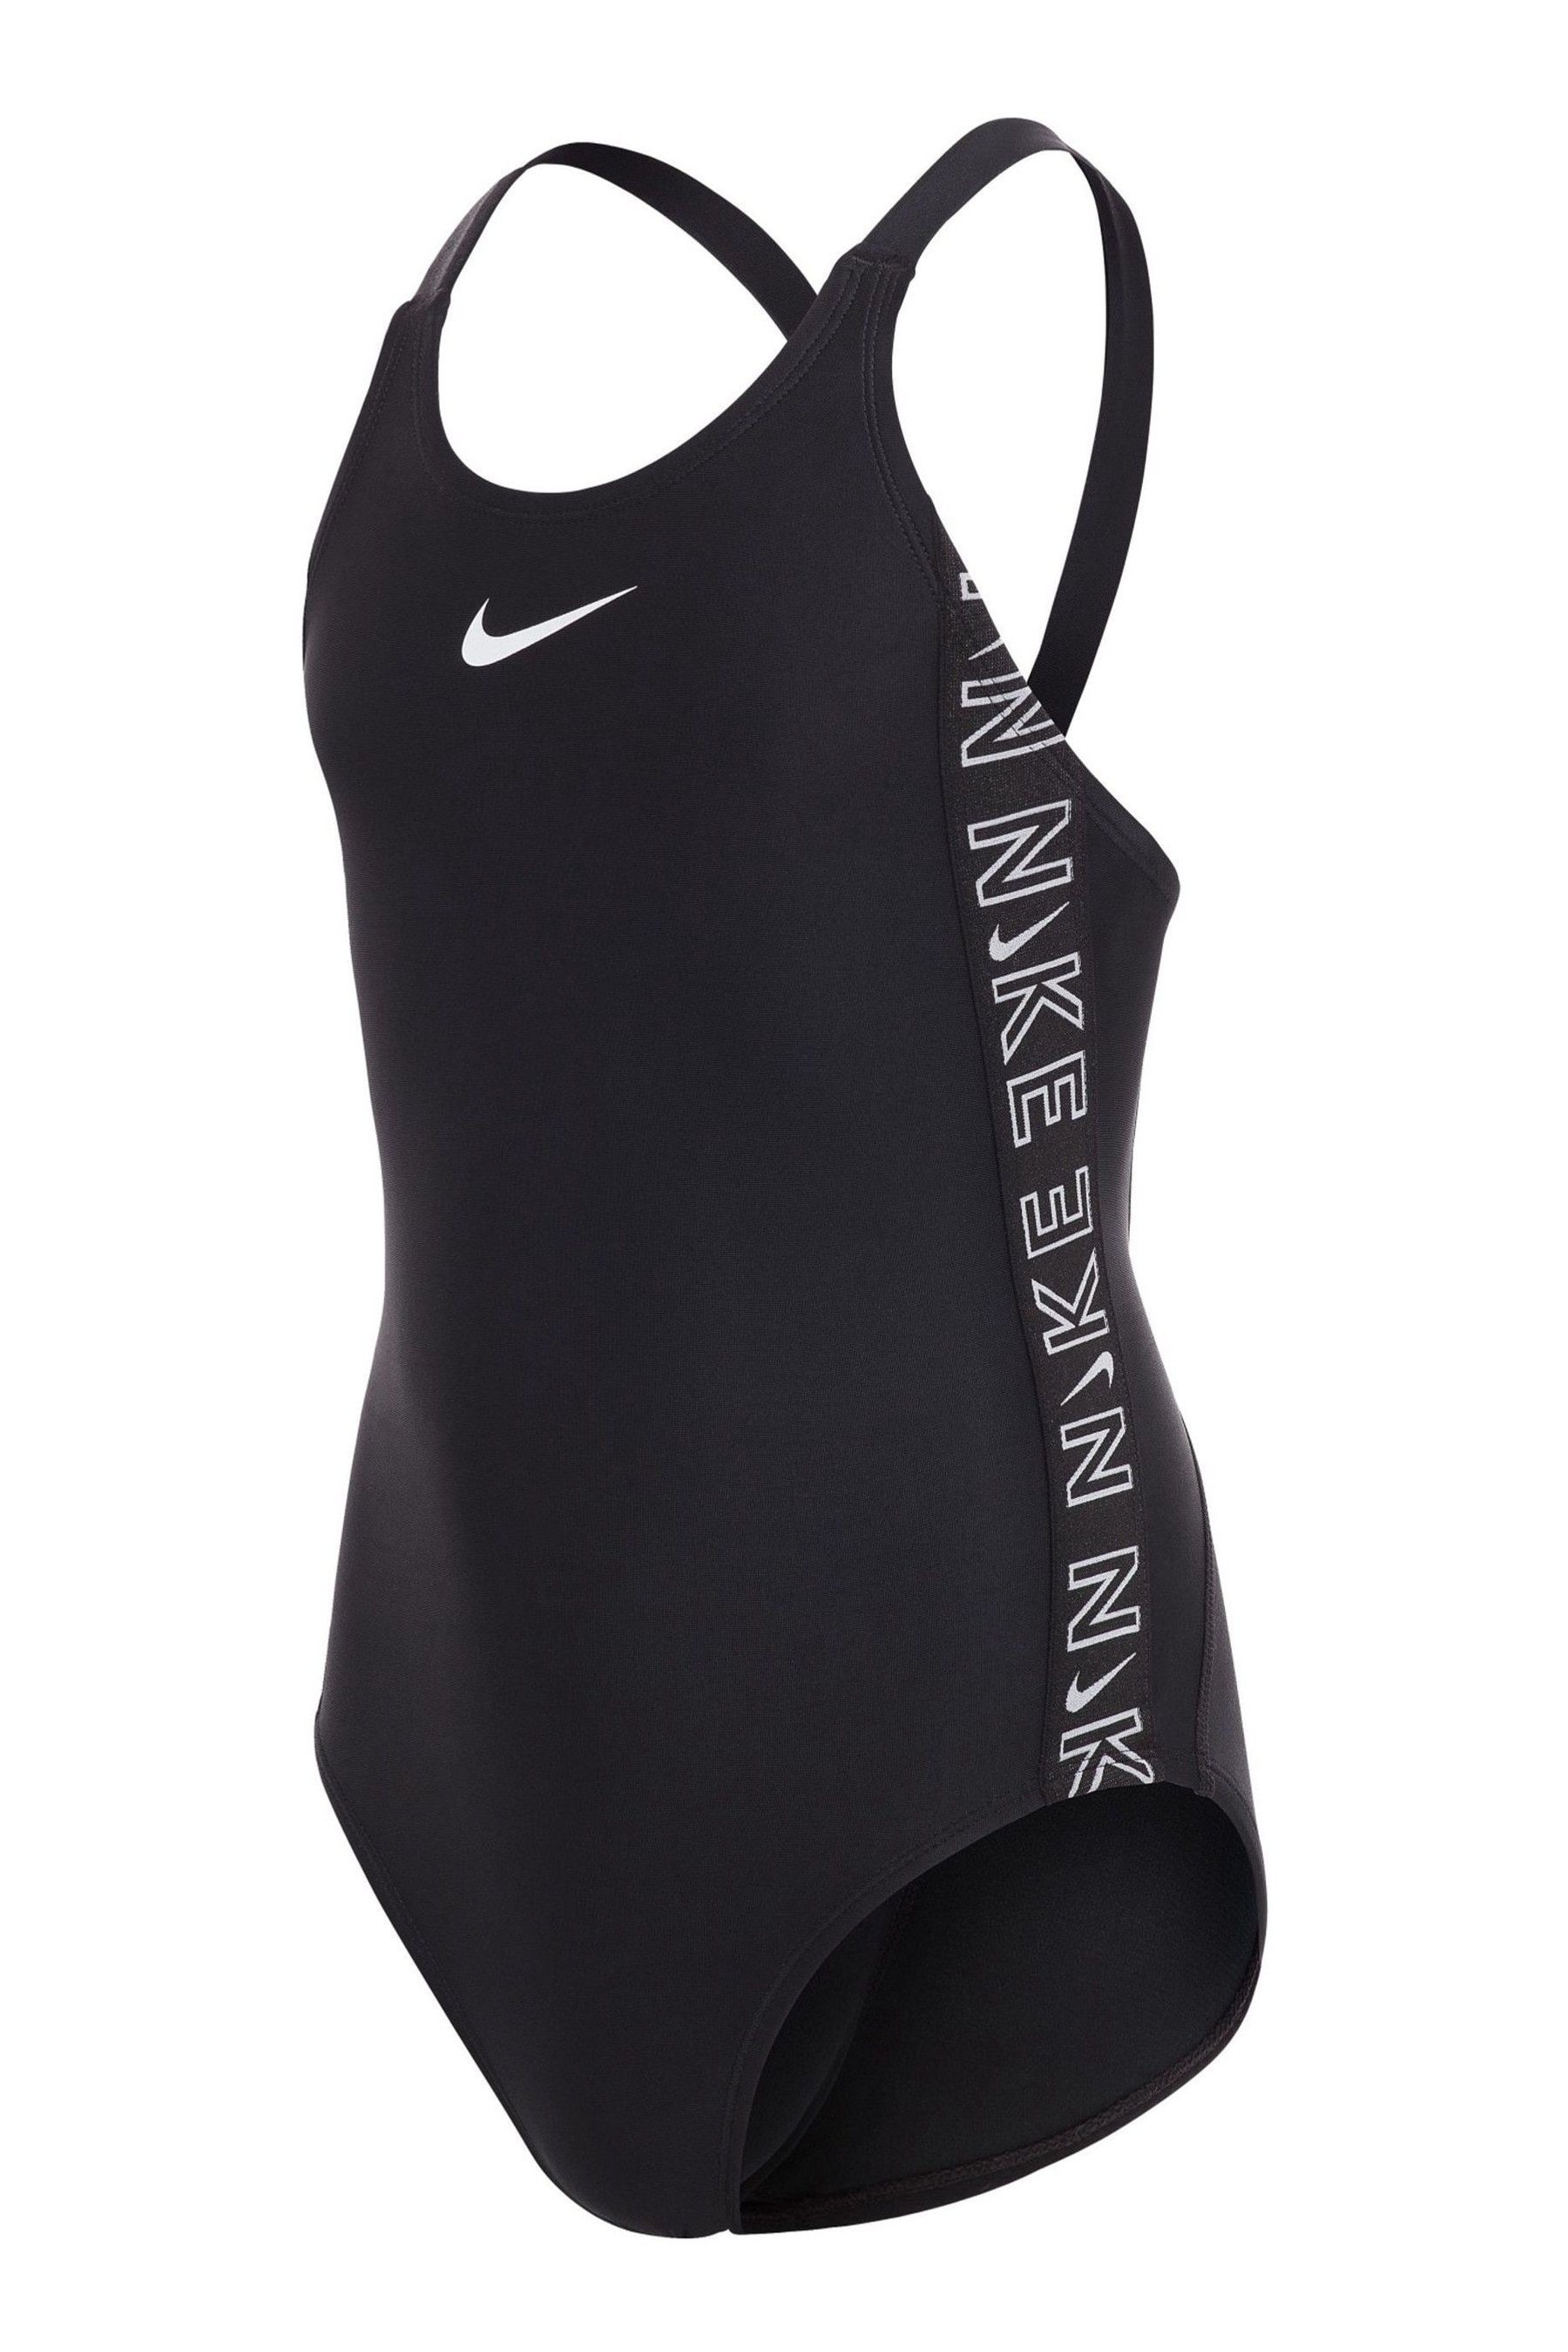 Buy Nike Logo Tape Fastback Swimsuit from the Laura Ashley online shop